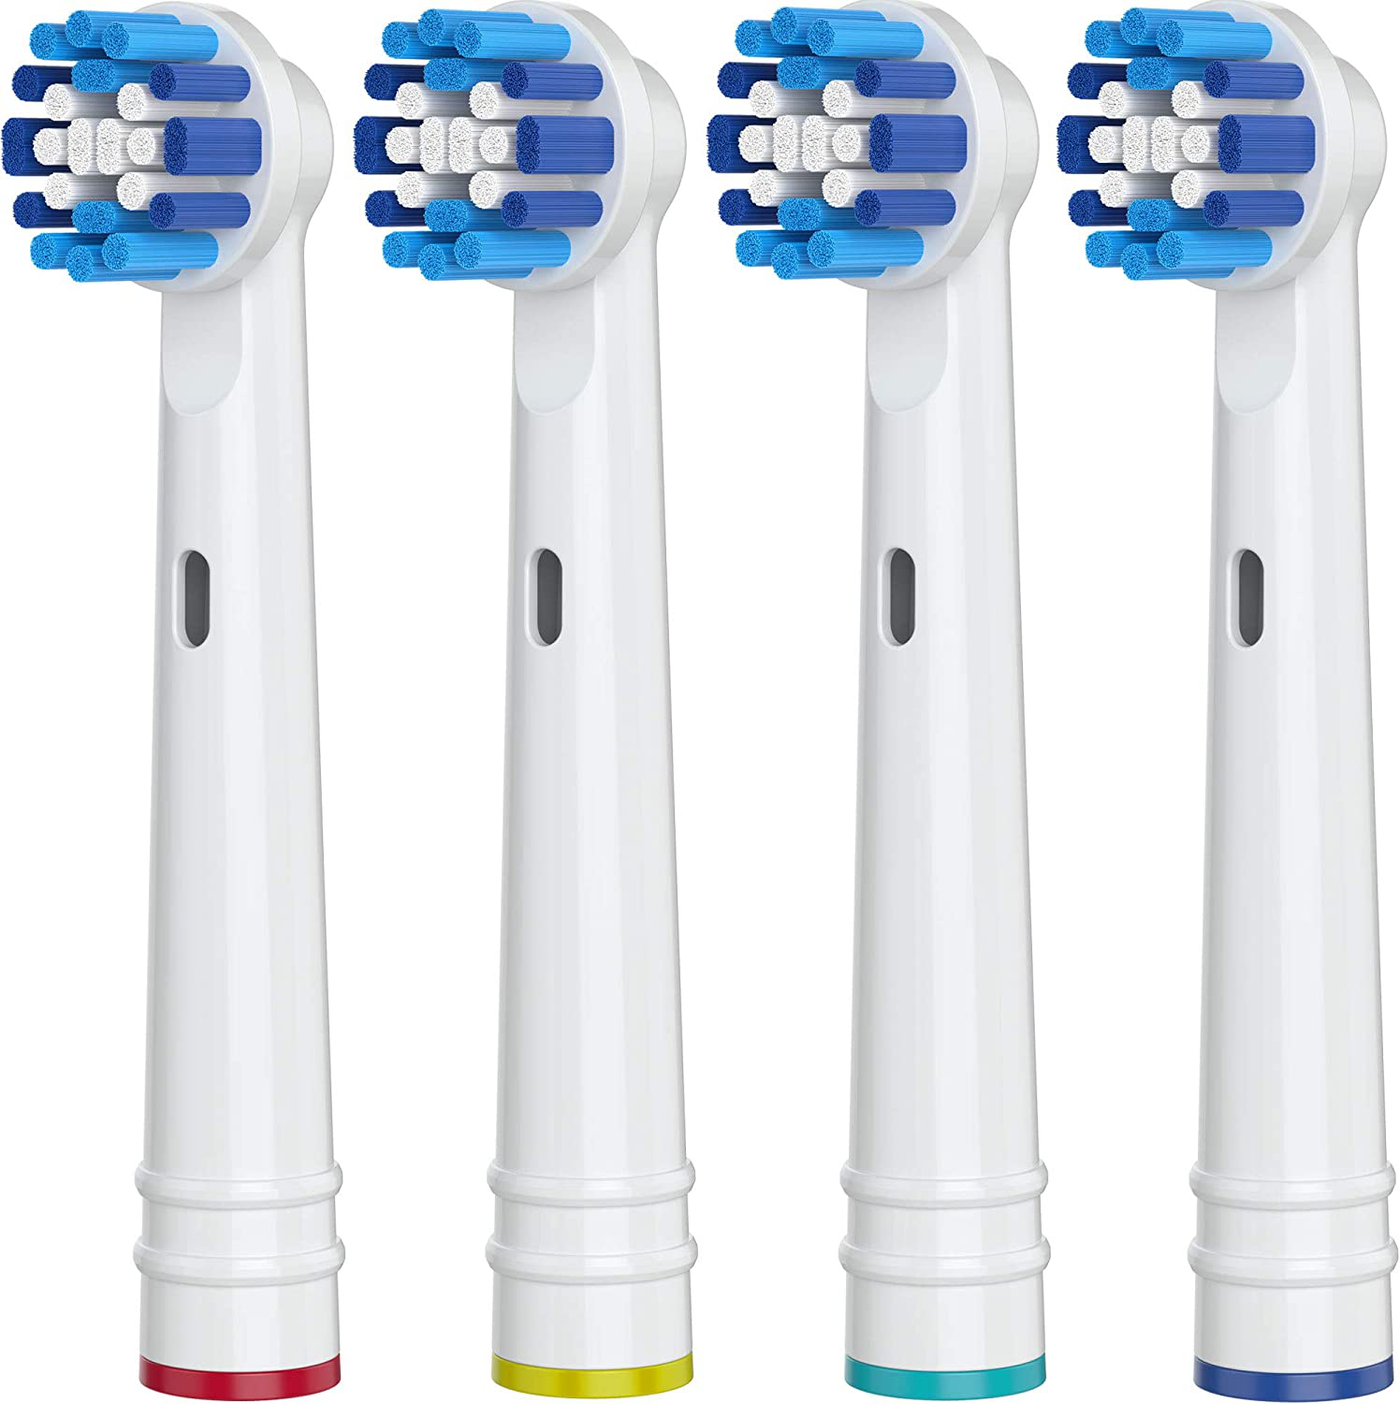 Replacement Toothbrush Heads for Oral-B, 4 Pack Replacement Heads Compatible with Oral B Braun Electric Toothbrush